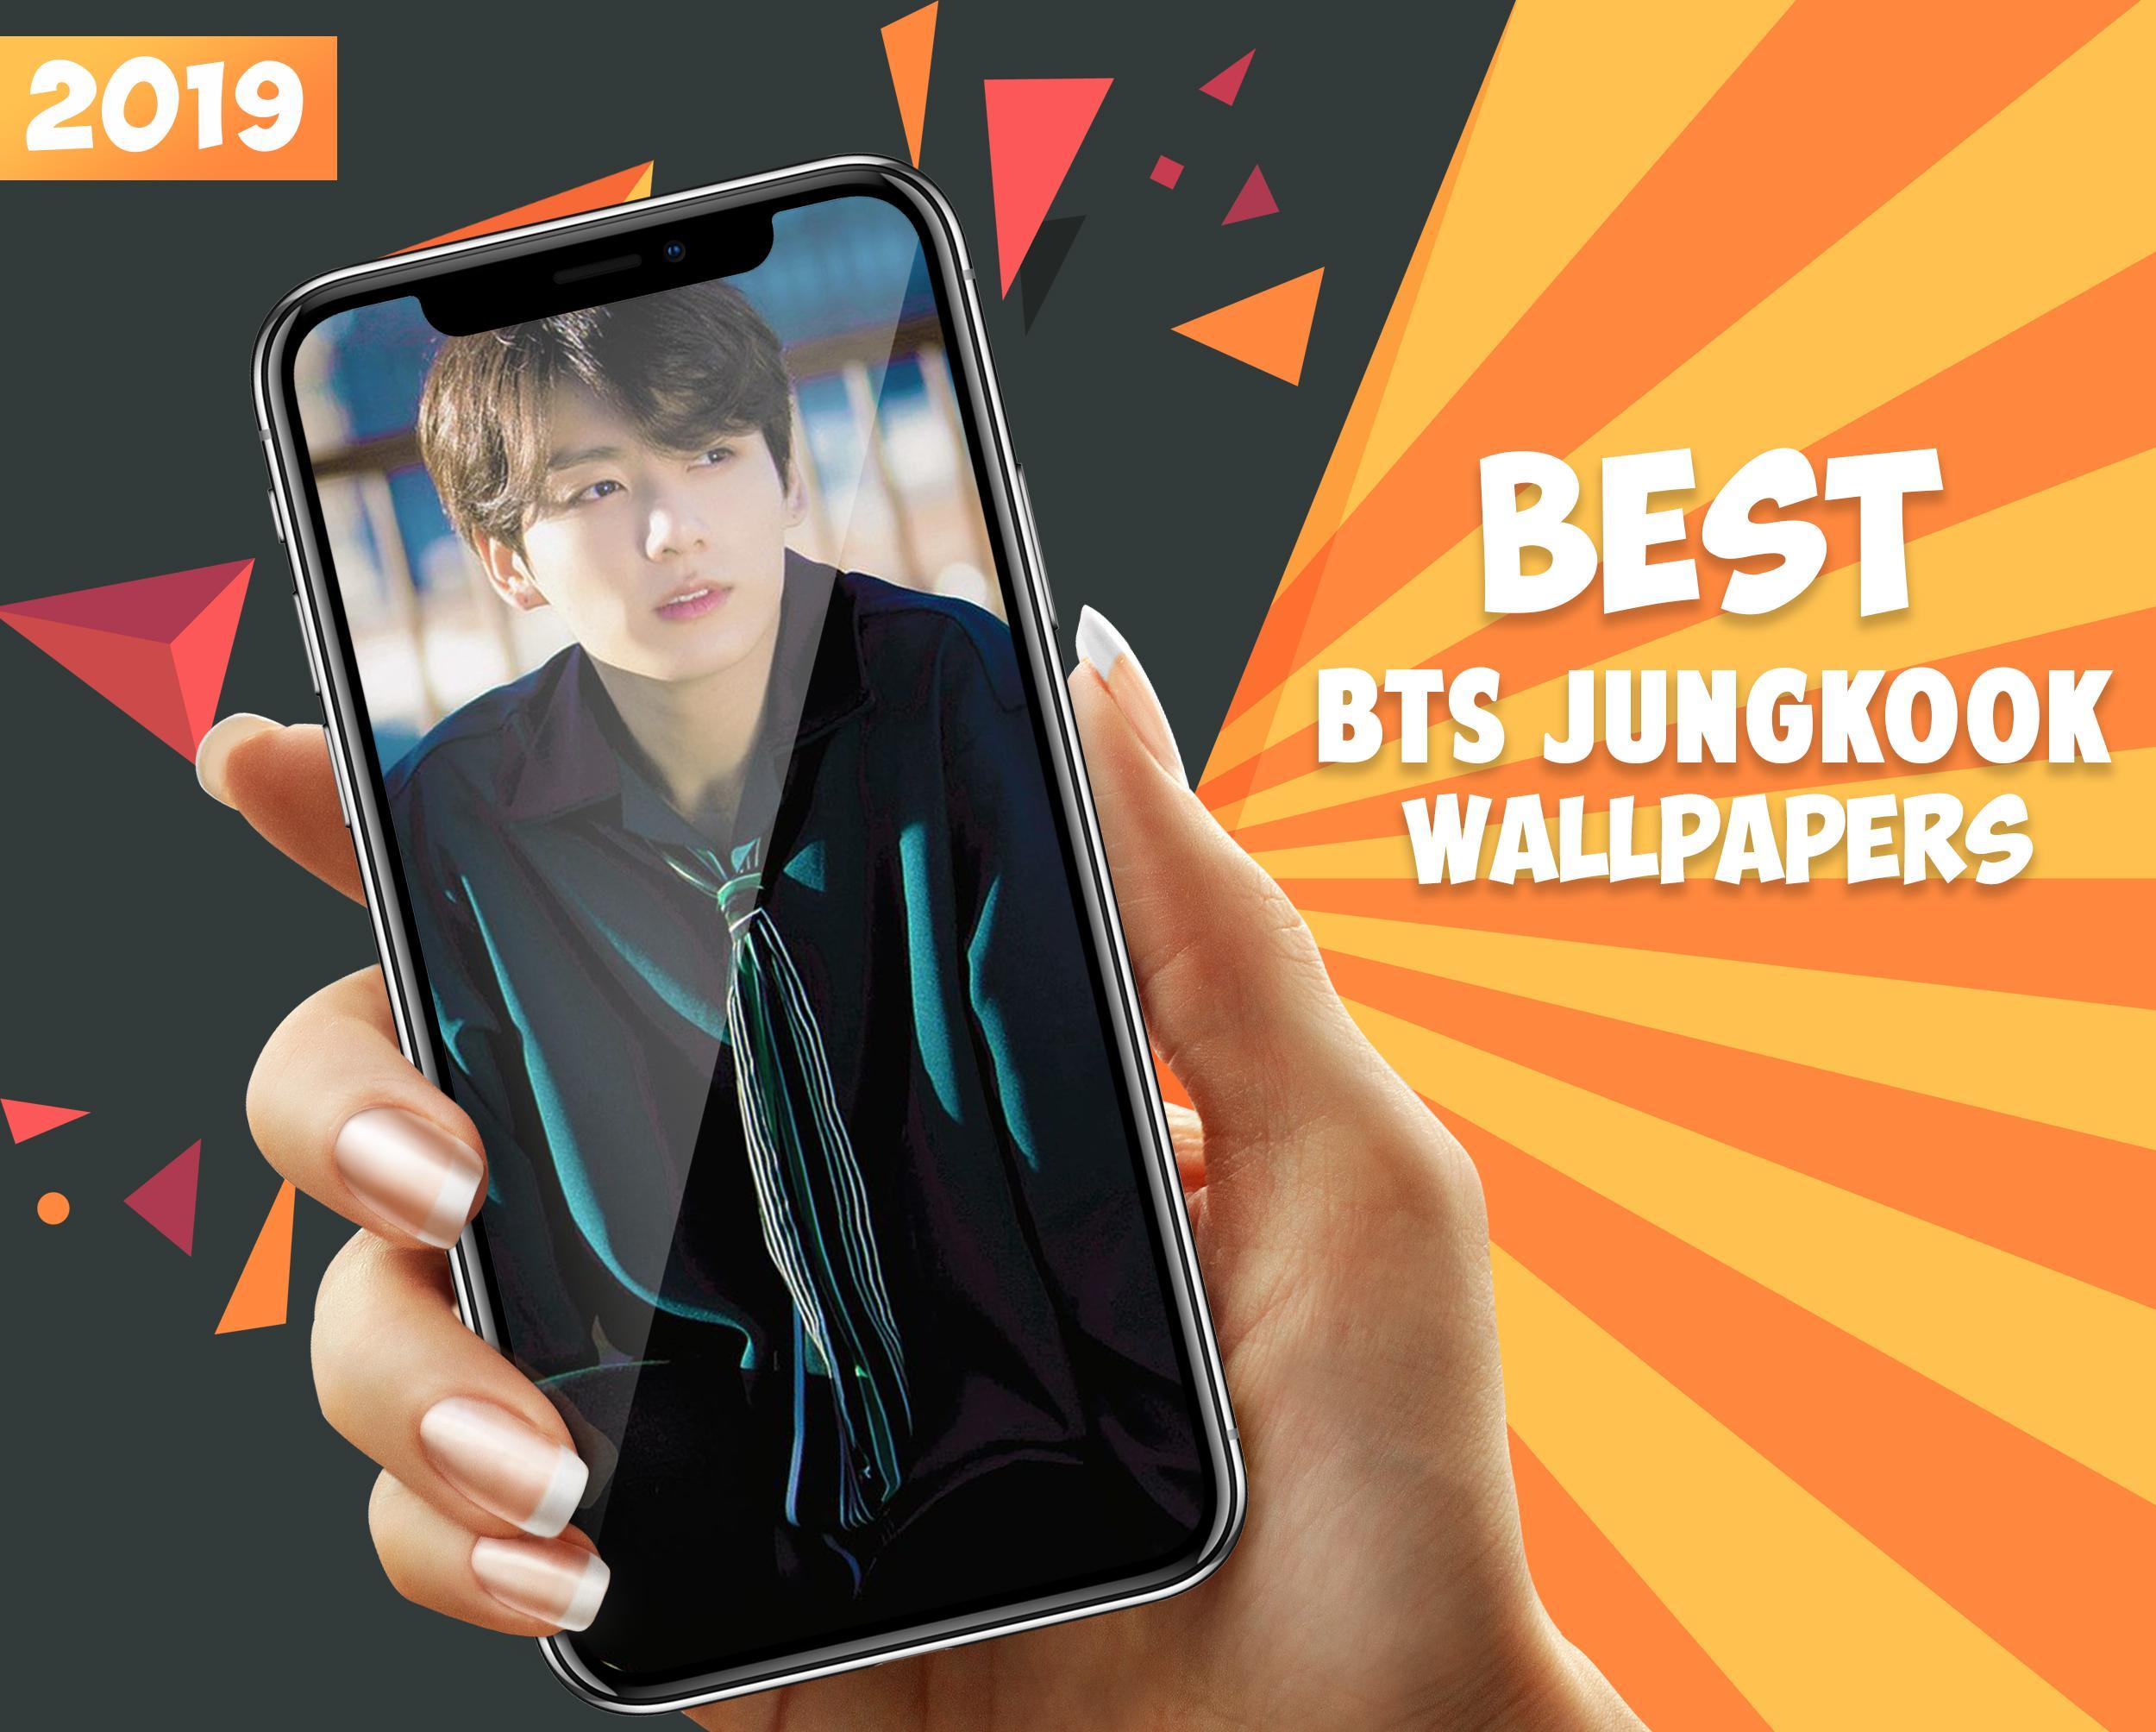 BTS Jungkook HD Wallpapers for Android - APK Download